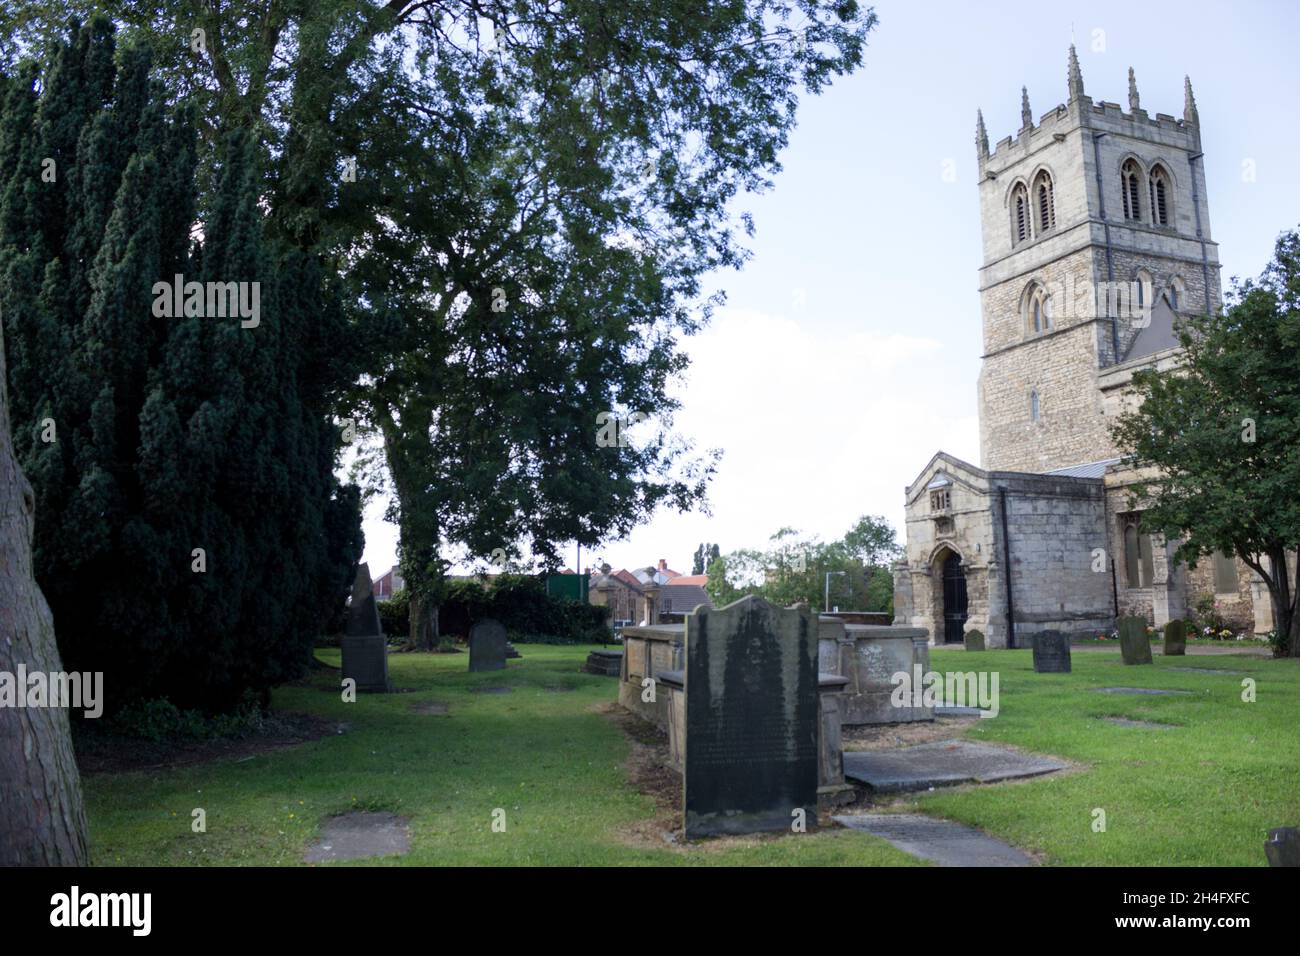 England, Church, Place of Worship, Religion, Holy Place, Trees, Sunshine, Cemetery, Burial Ground, Graves, Churchyard, Holy Place, Faith Stock Photo